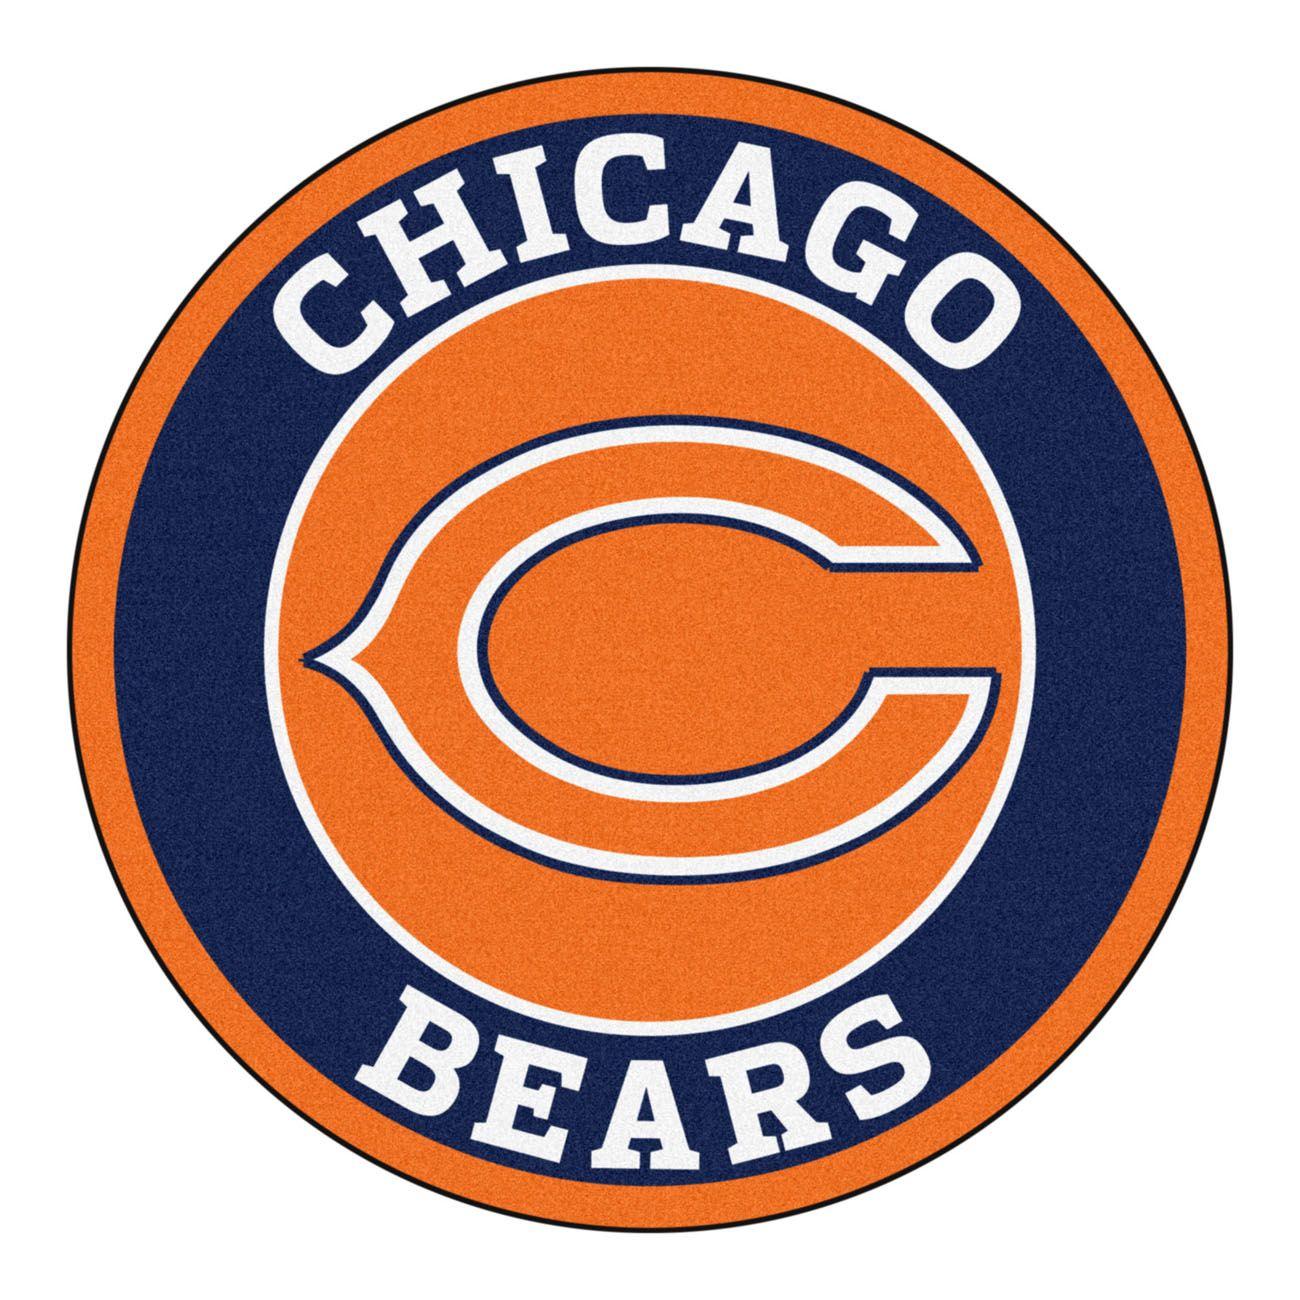 Chicago Bears Logo - Chicago Bears Logo, Chicago Bears Symbol Meaning, History and Evolution